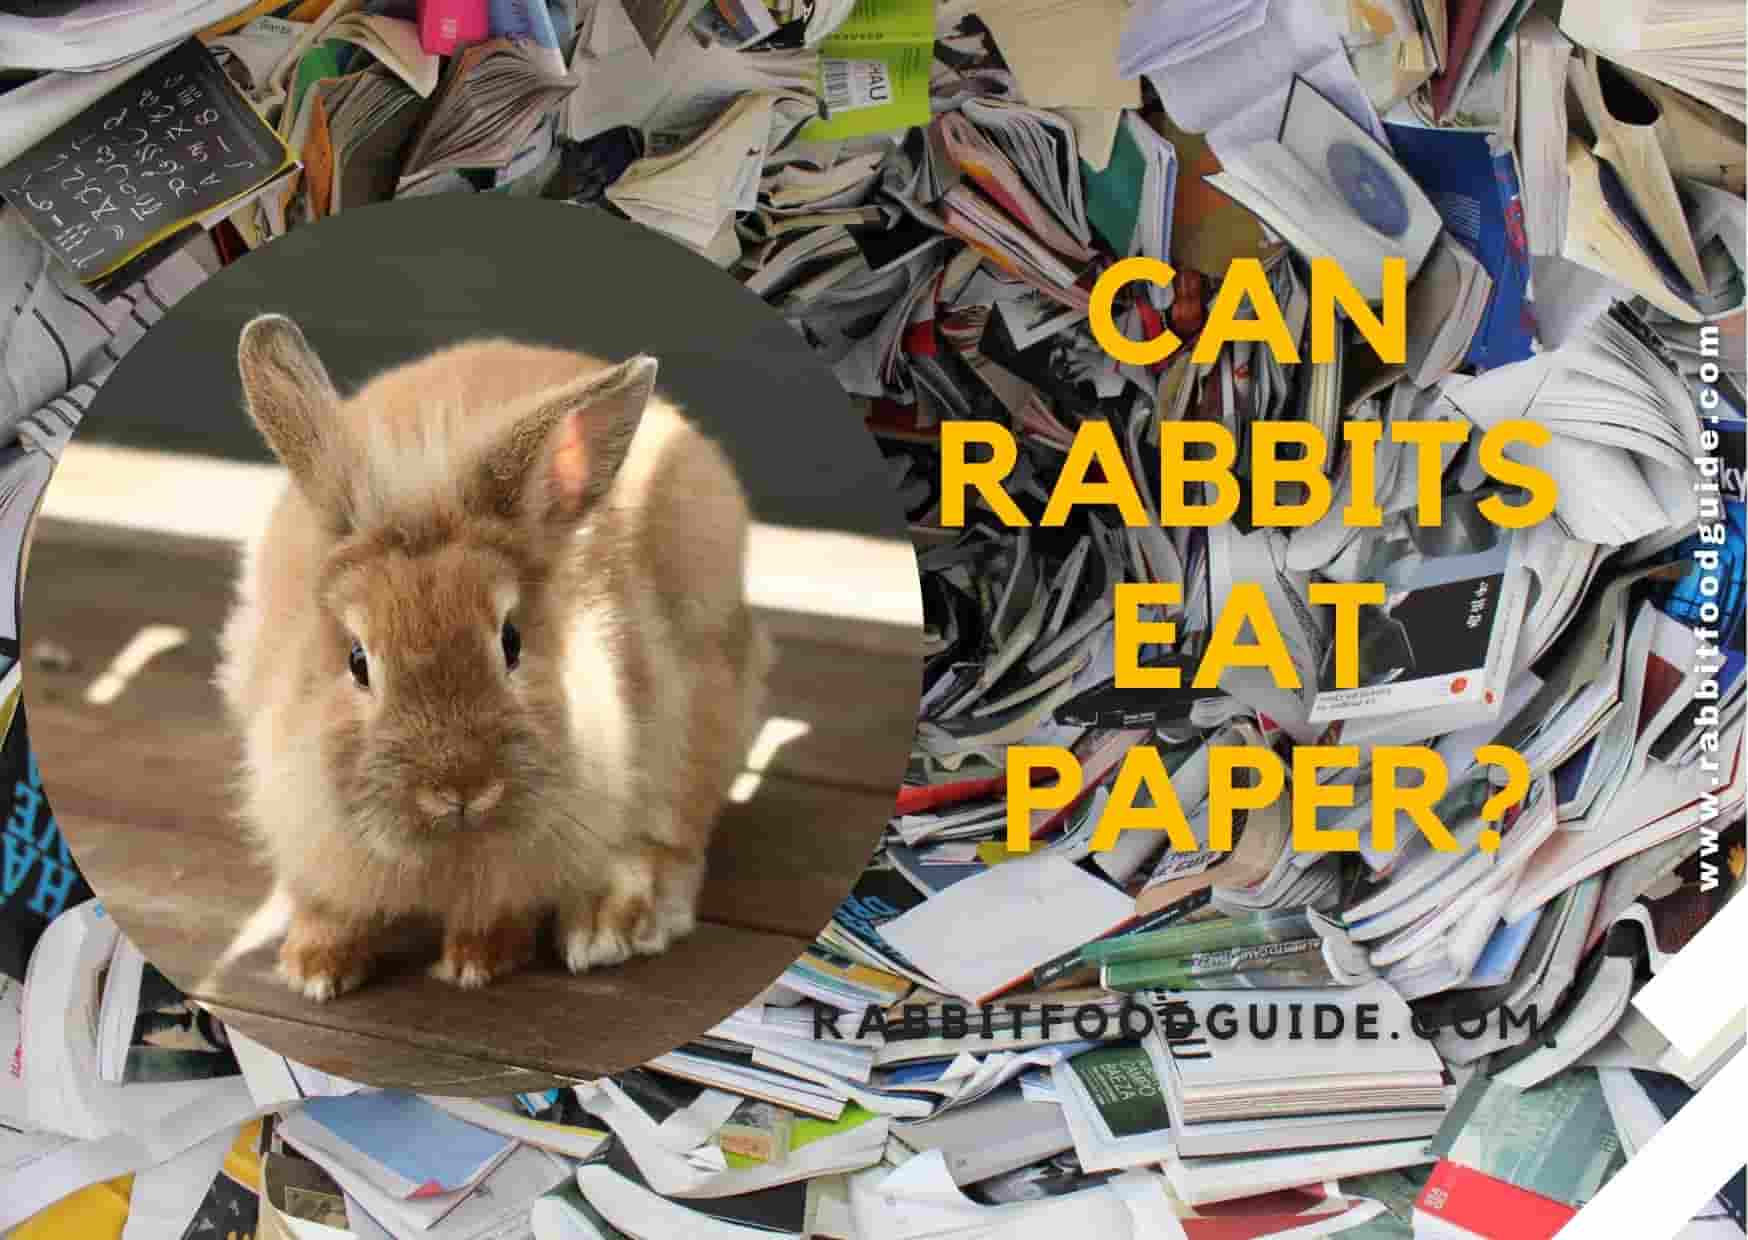 can rabbits eat paper?